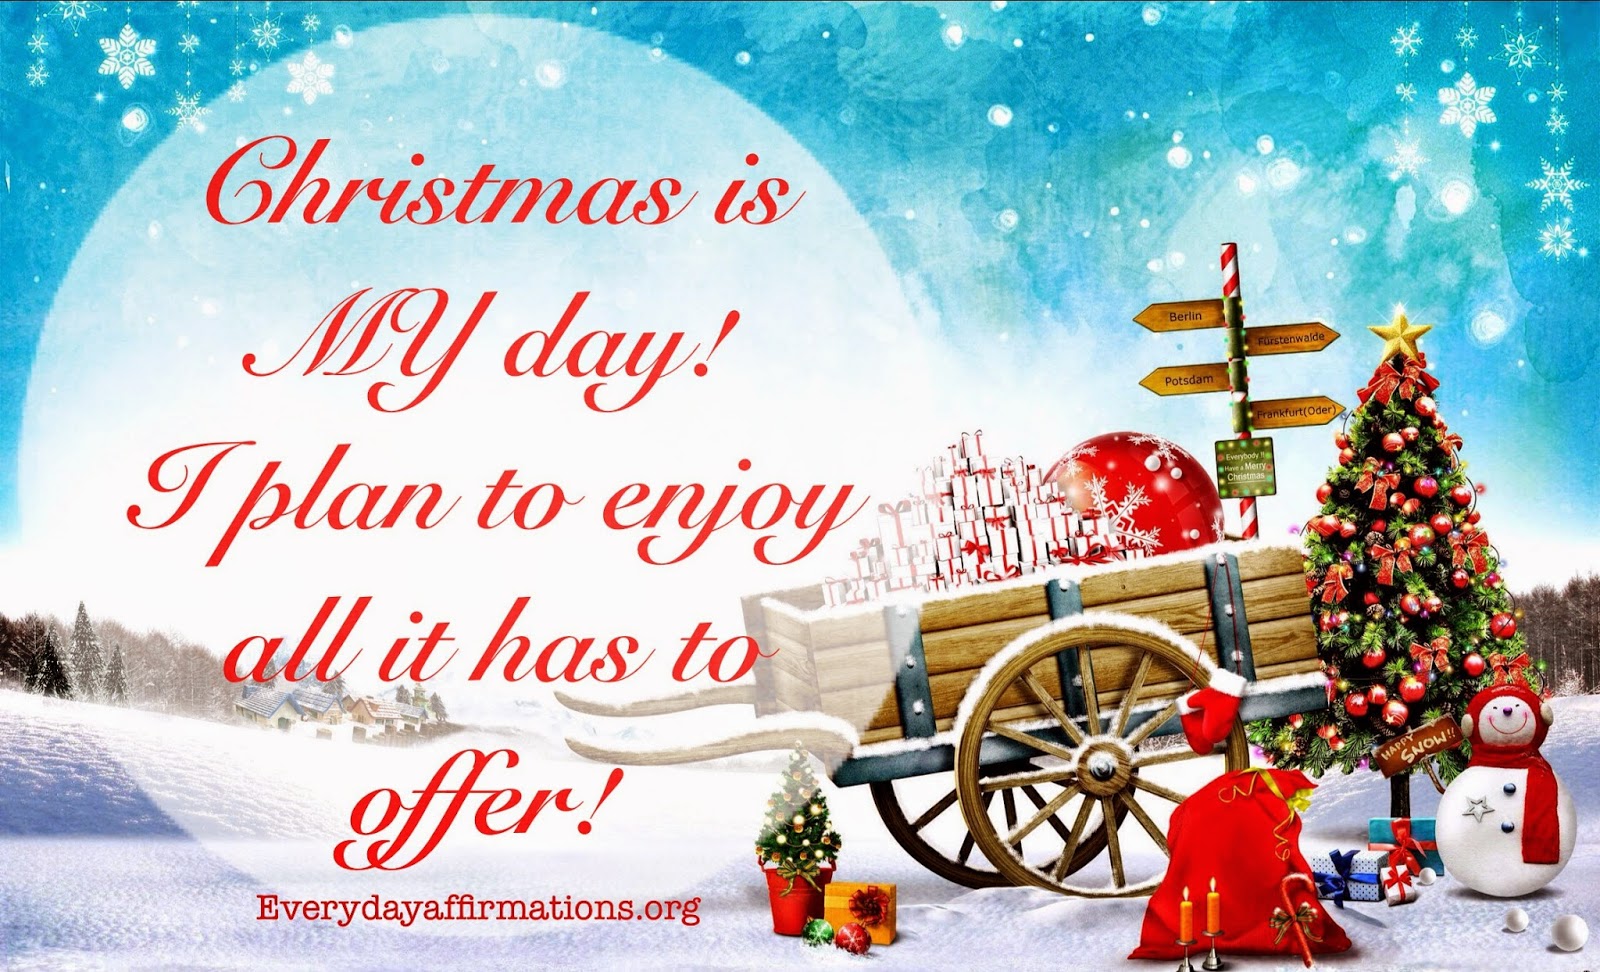 Daily Affirmations, affirmations for christmas, newyear affirmations